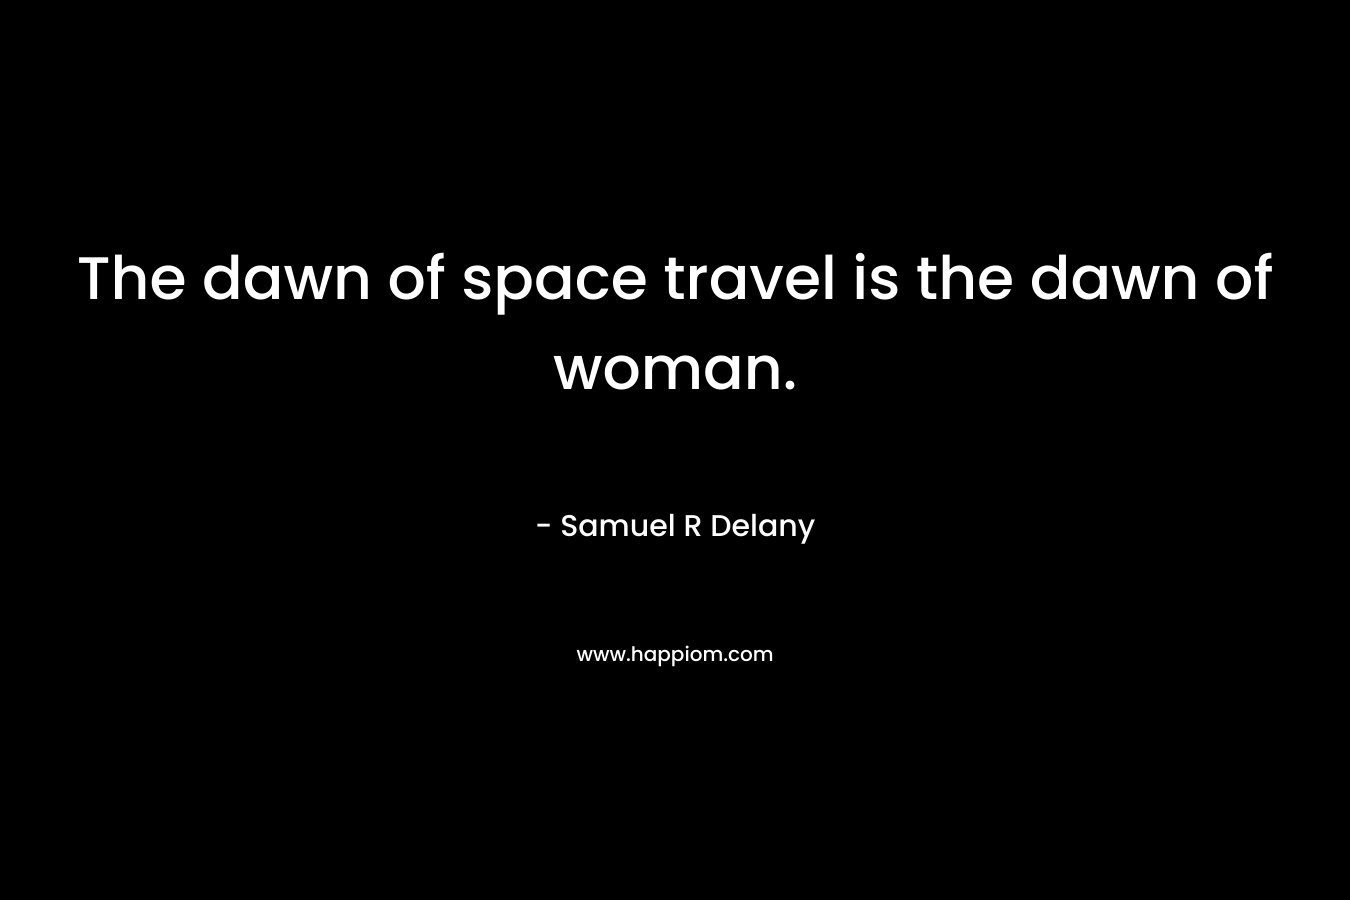 The dawn of space travel is the dawn of woman.